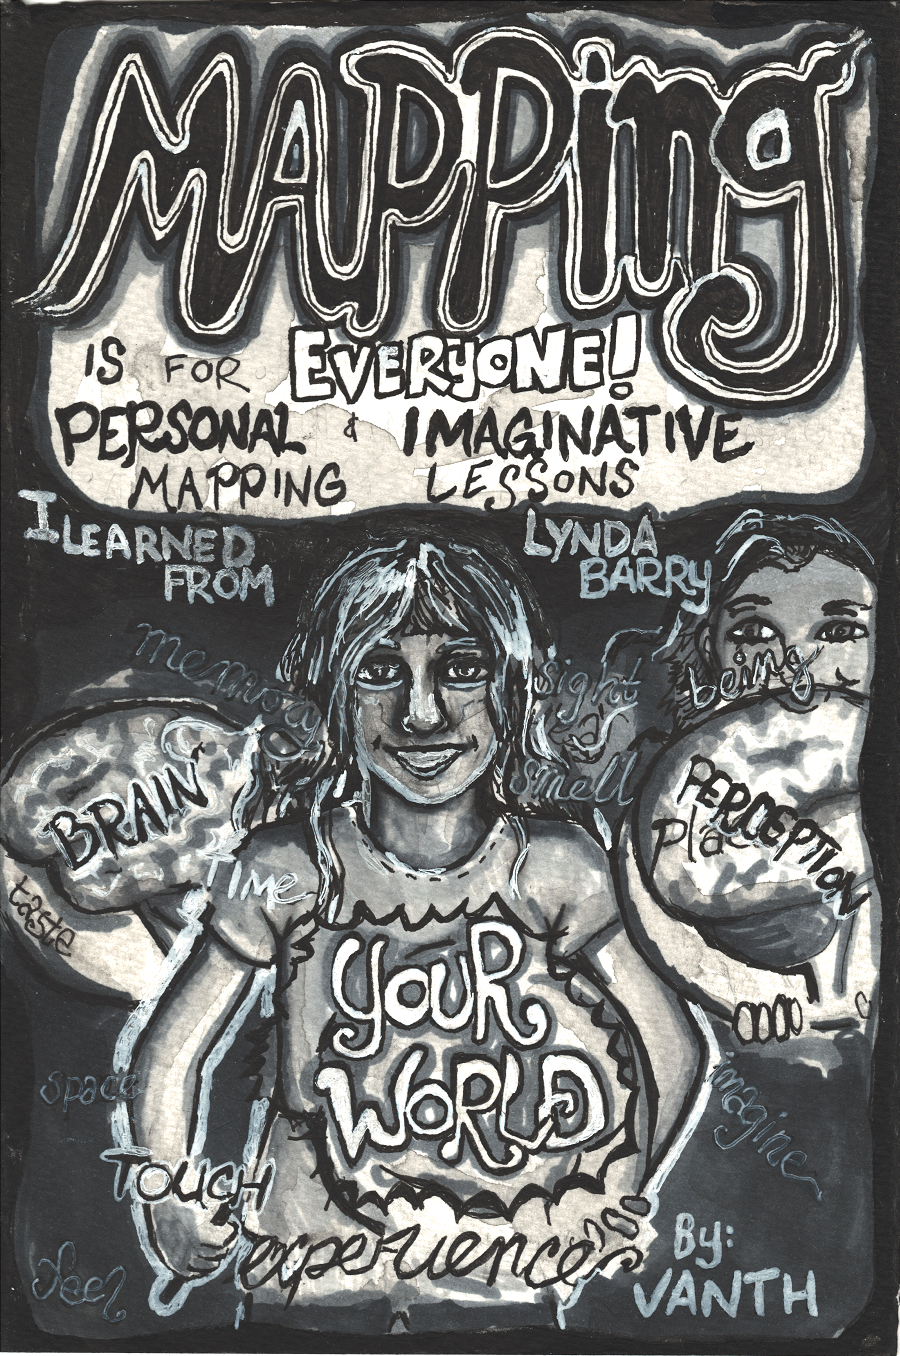 Mapping is for Everyone! Personal and Imaginative Mapping Lessons from Lynda Barry 'zine